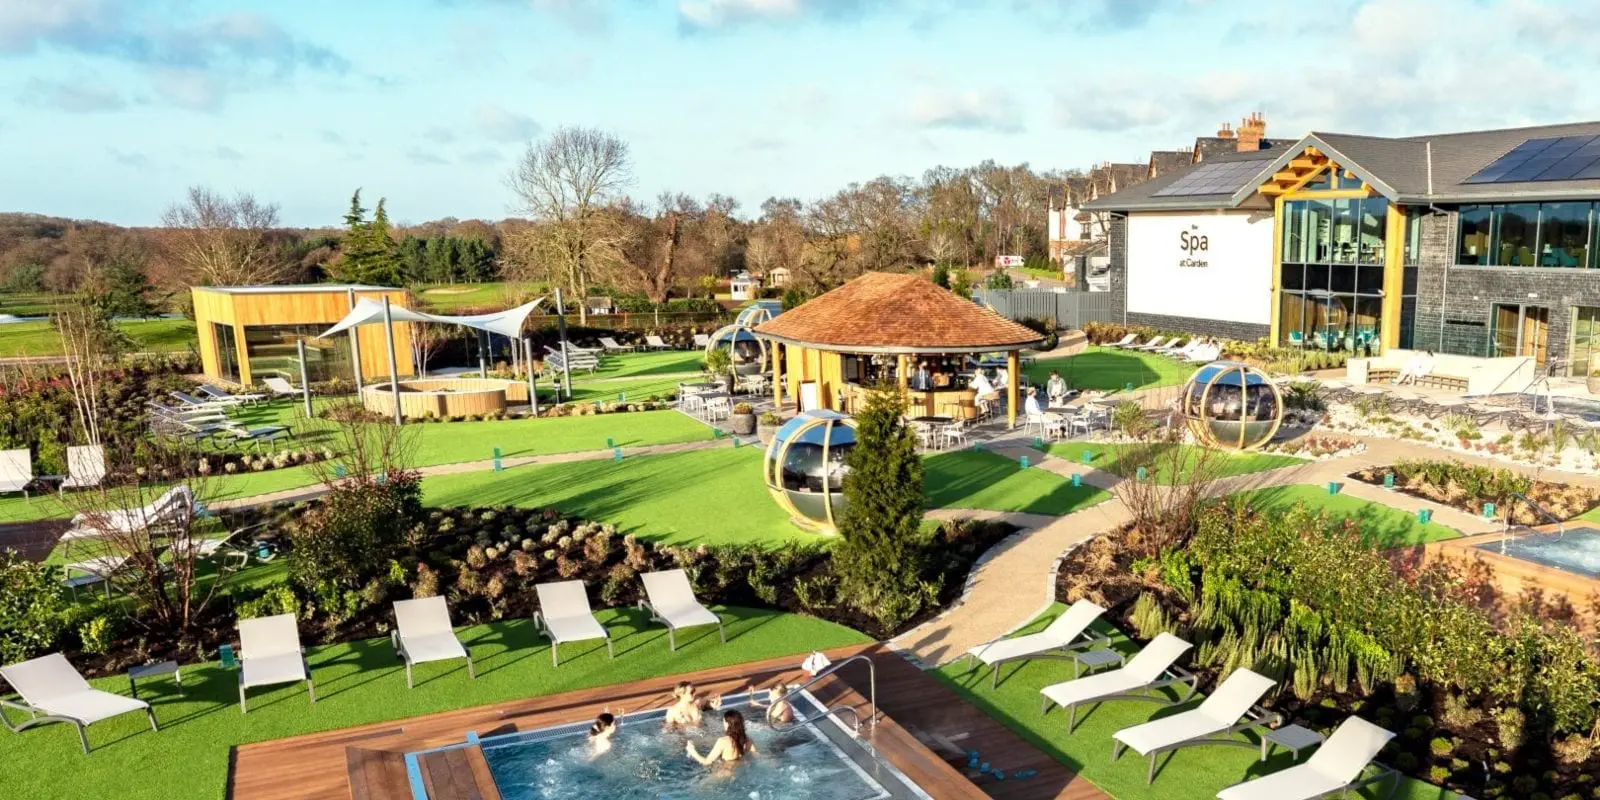 Carden Park Hotel in Cheshire Cover Outdoor Seating Area